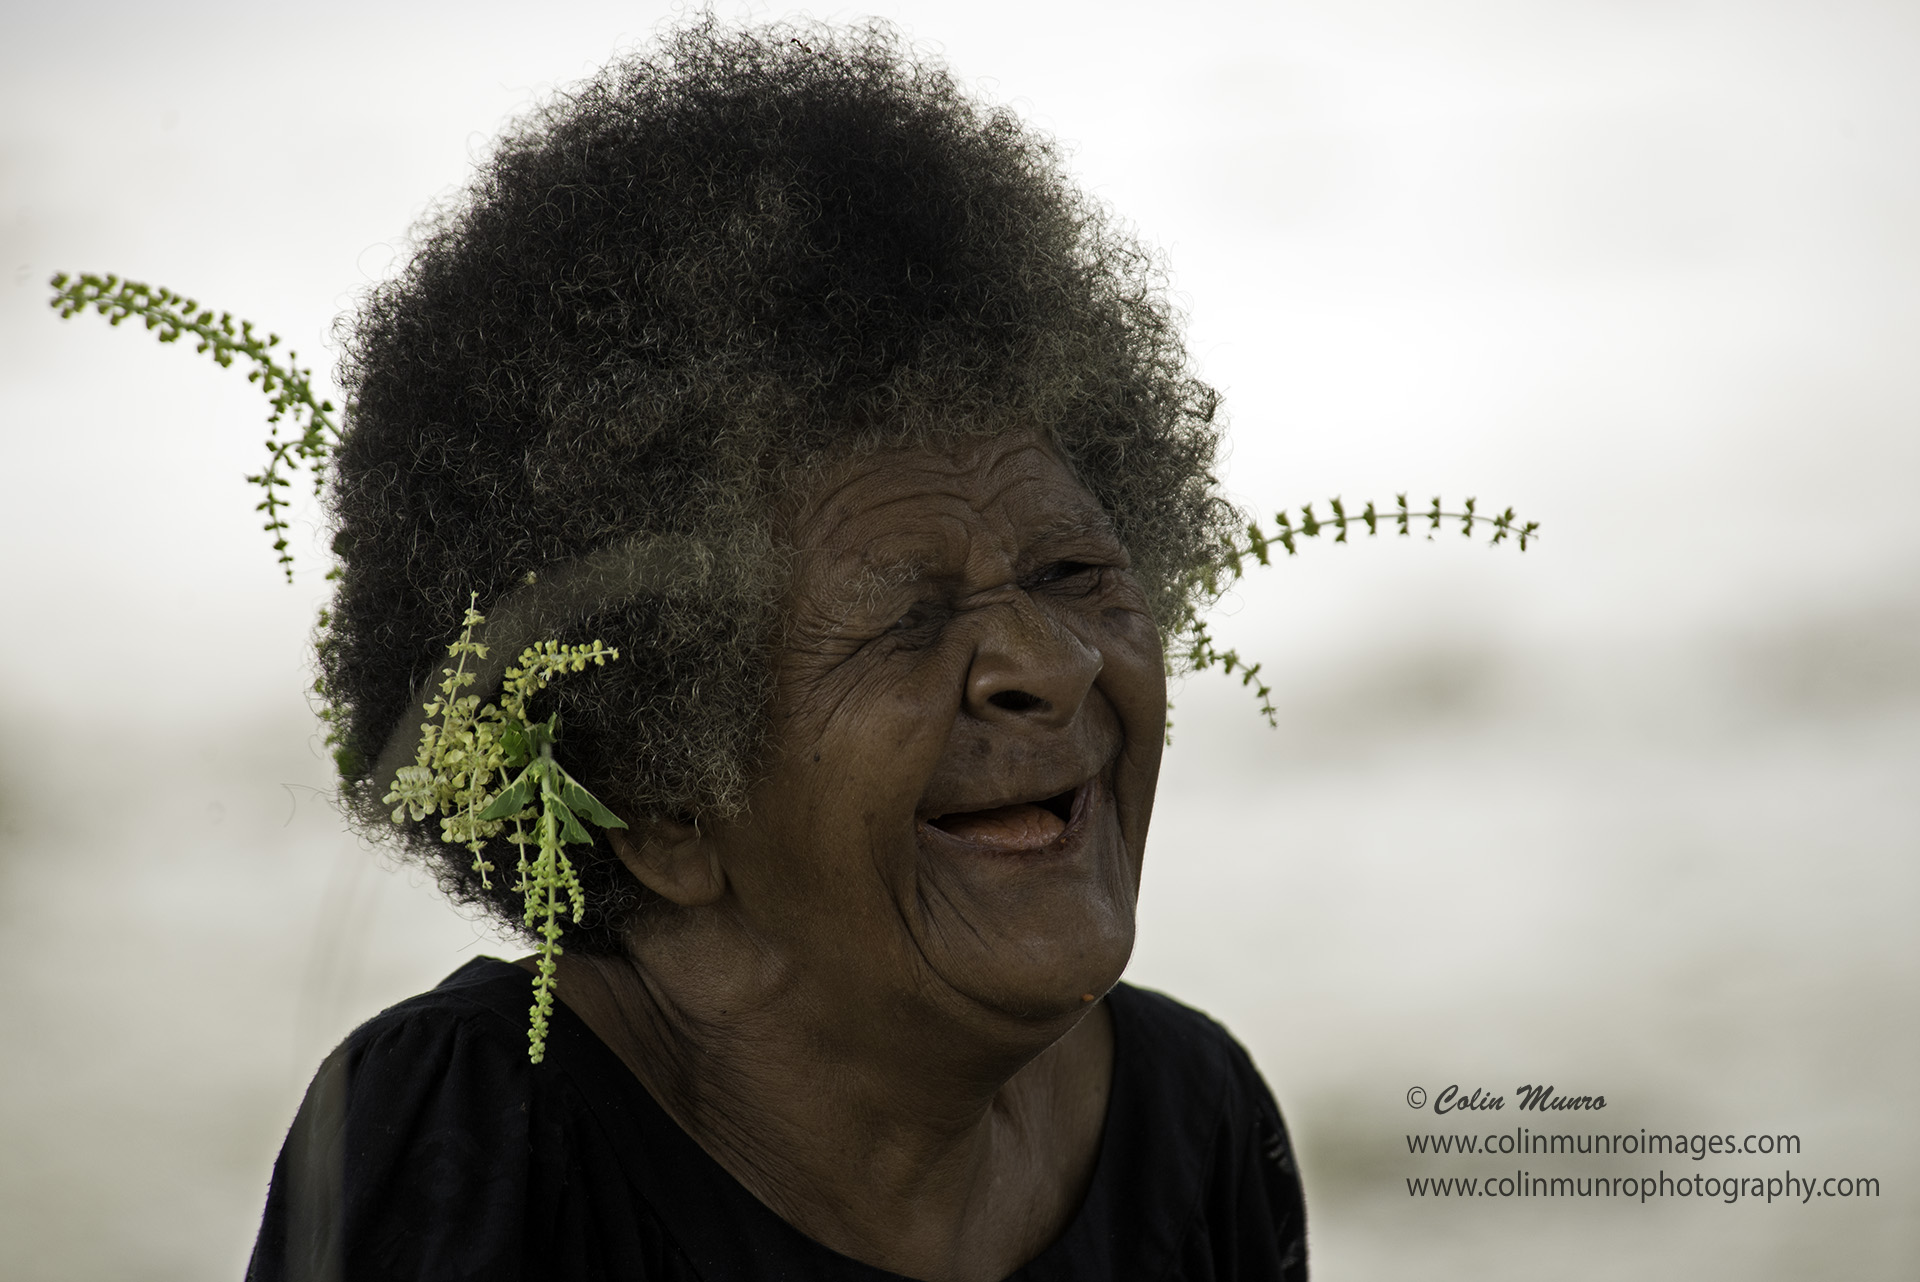 An old lady weaving pandanus leaves laughs as she works. Suau Island, Milne Bay Province, Papua New Guinea. Colin Munro Photography © Colin Munro